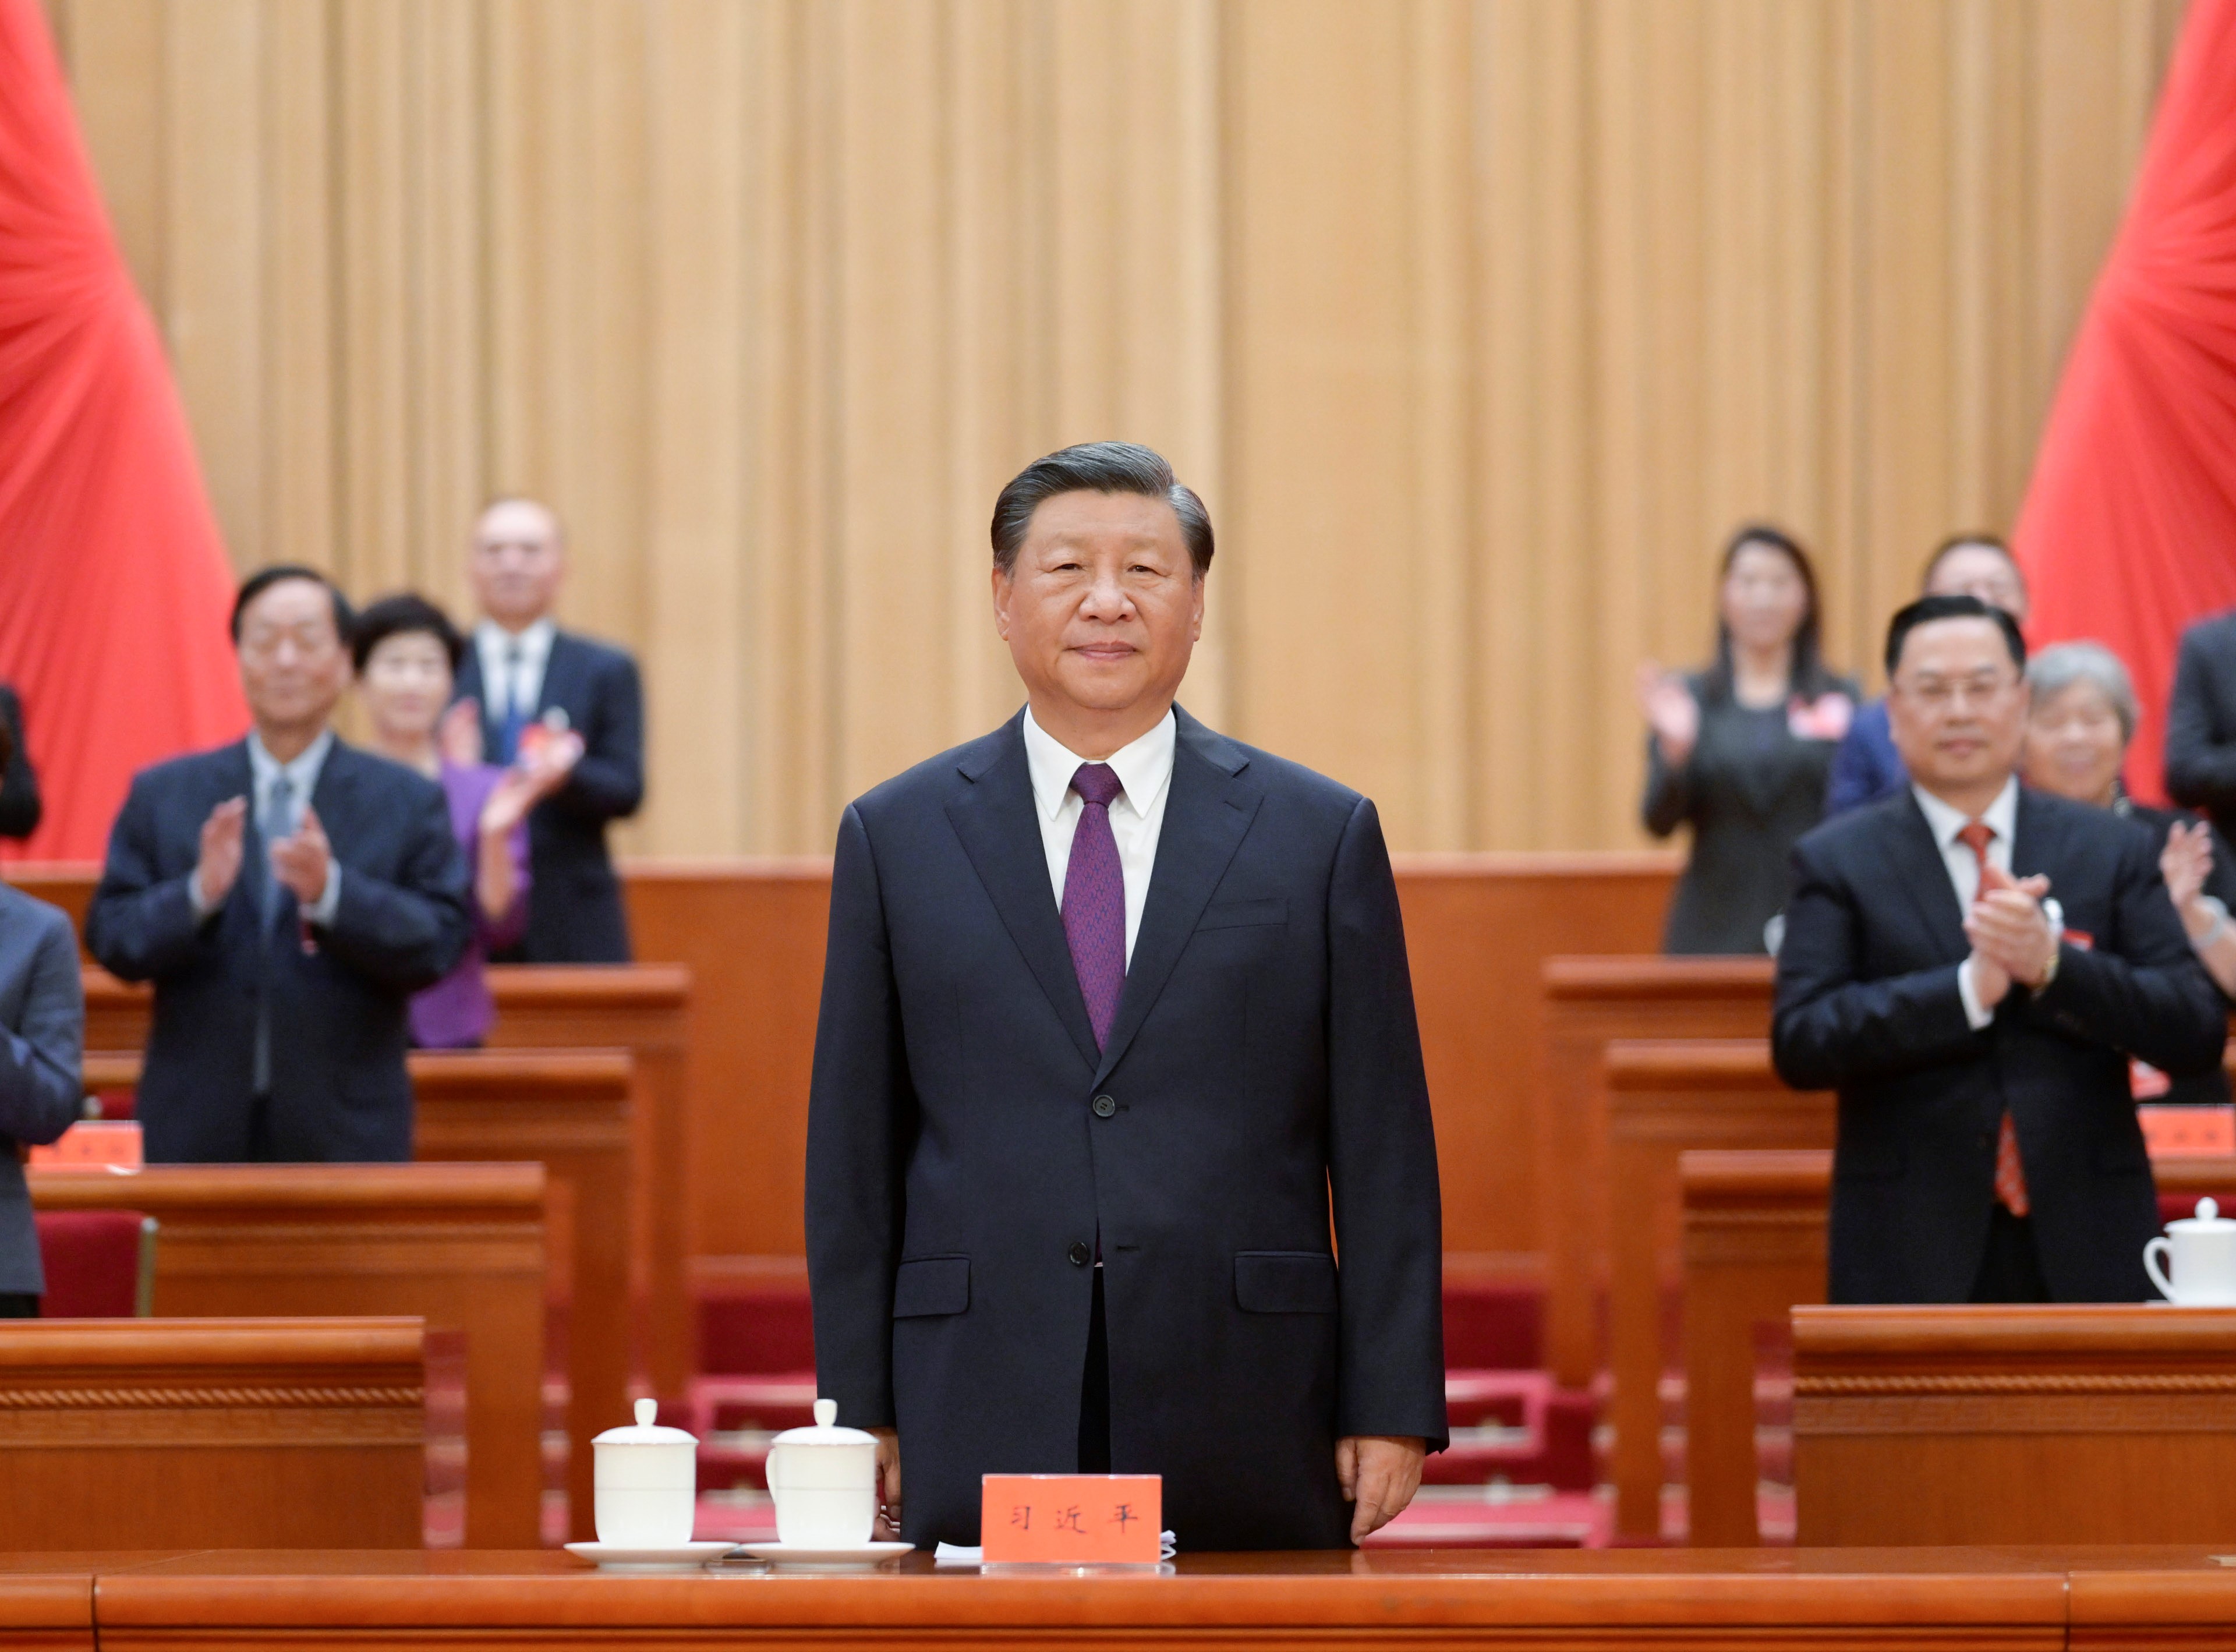 Xi Jinping next major appearance outside China is supposed to be at the Asia-Pacific Economic Cooperation leaders’ summit in San Francisco in November.